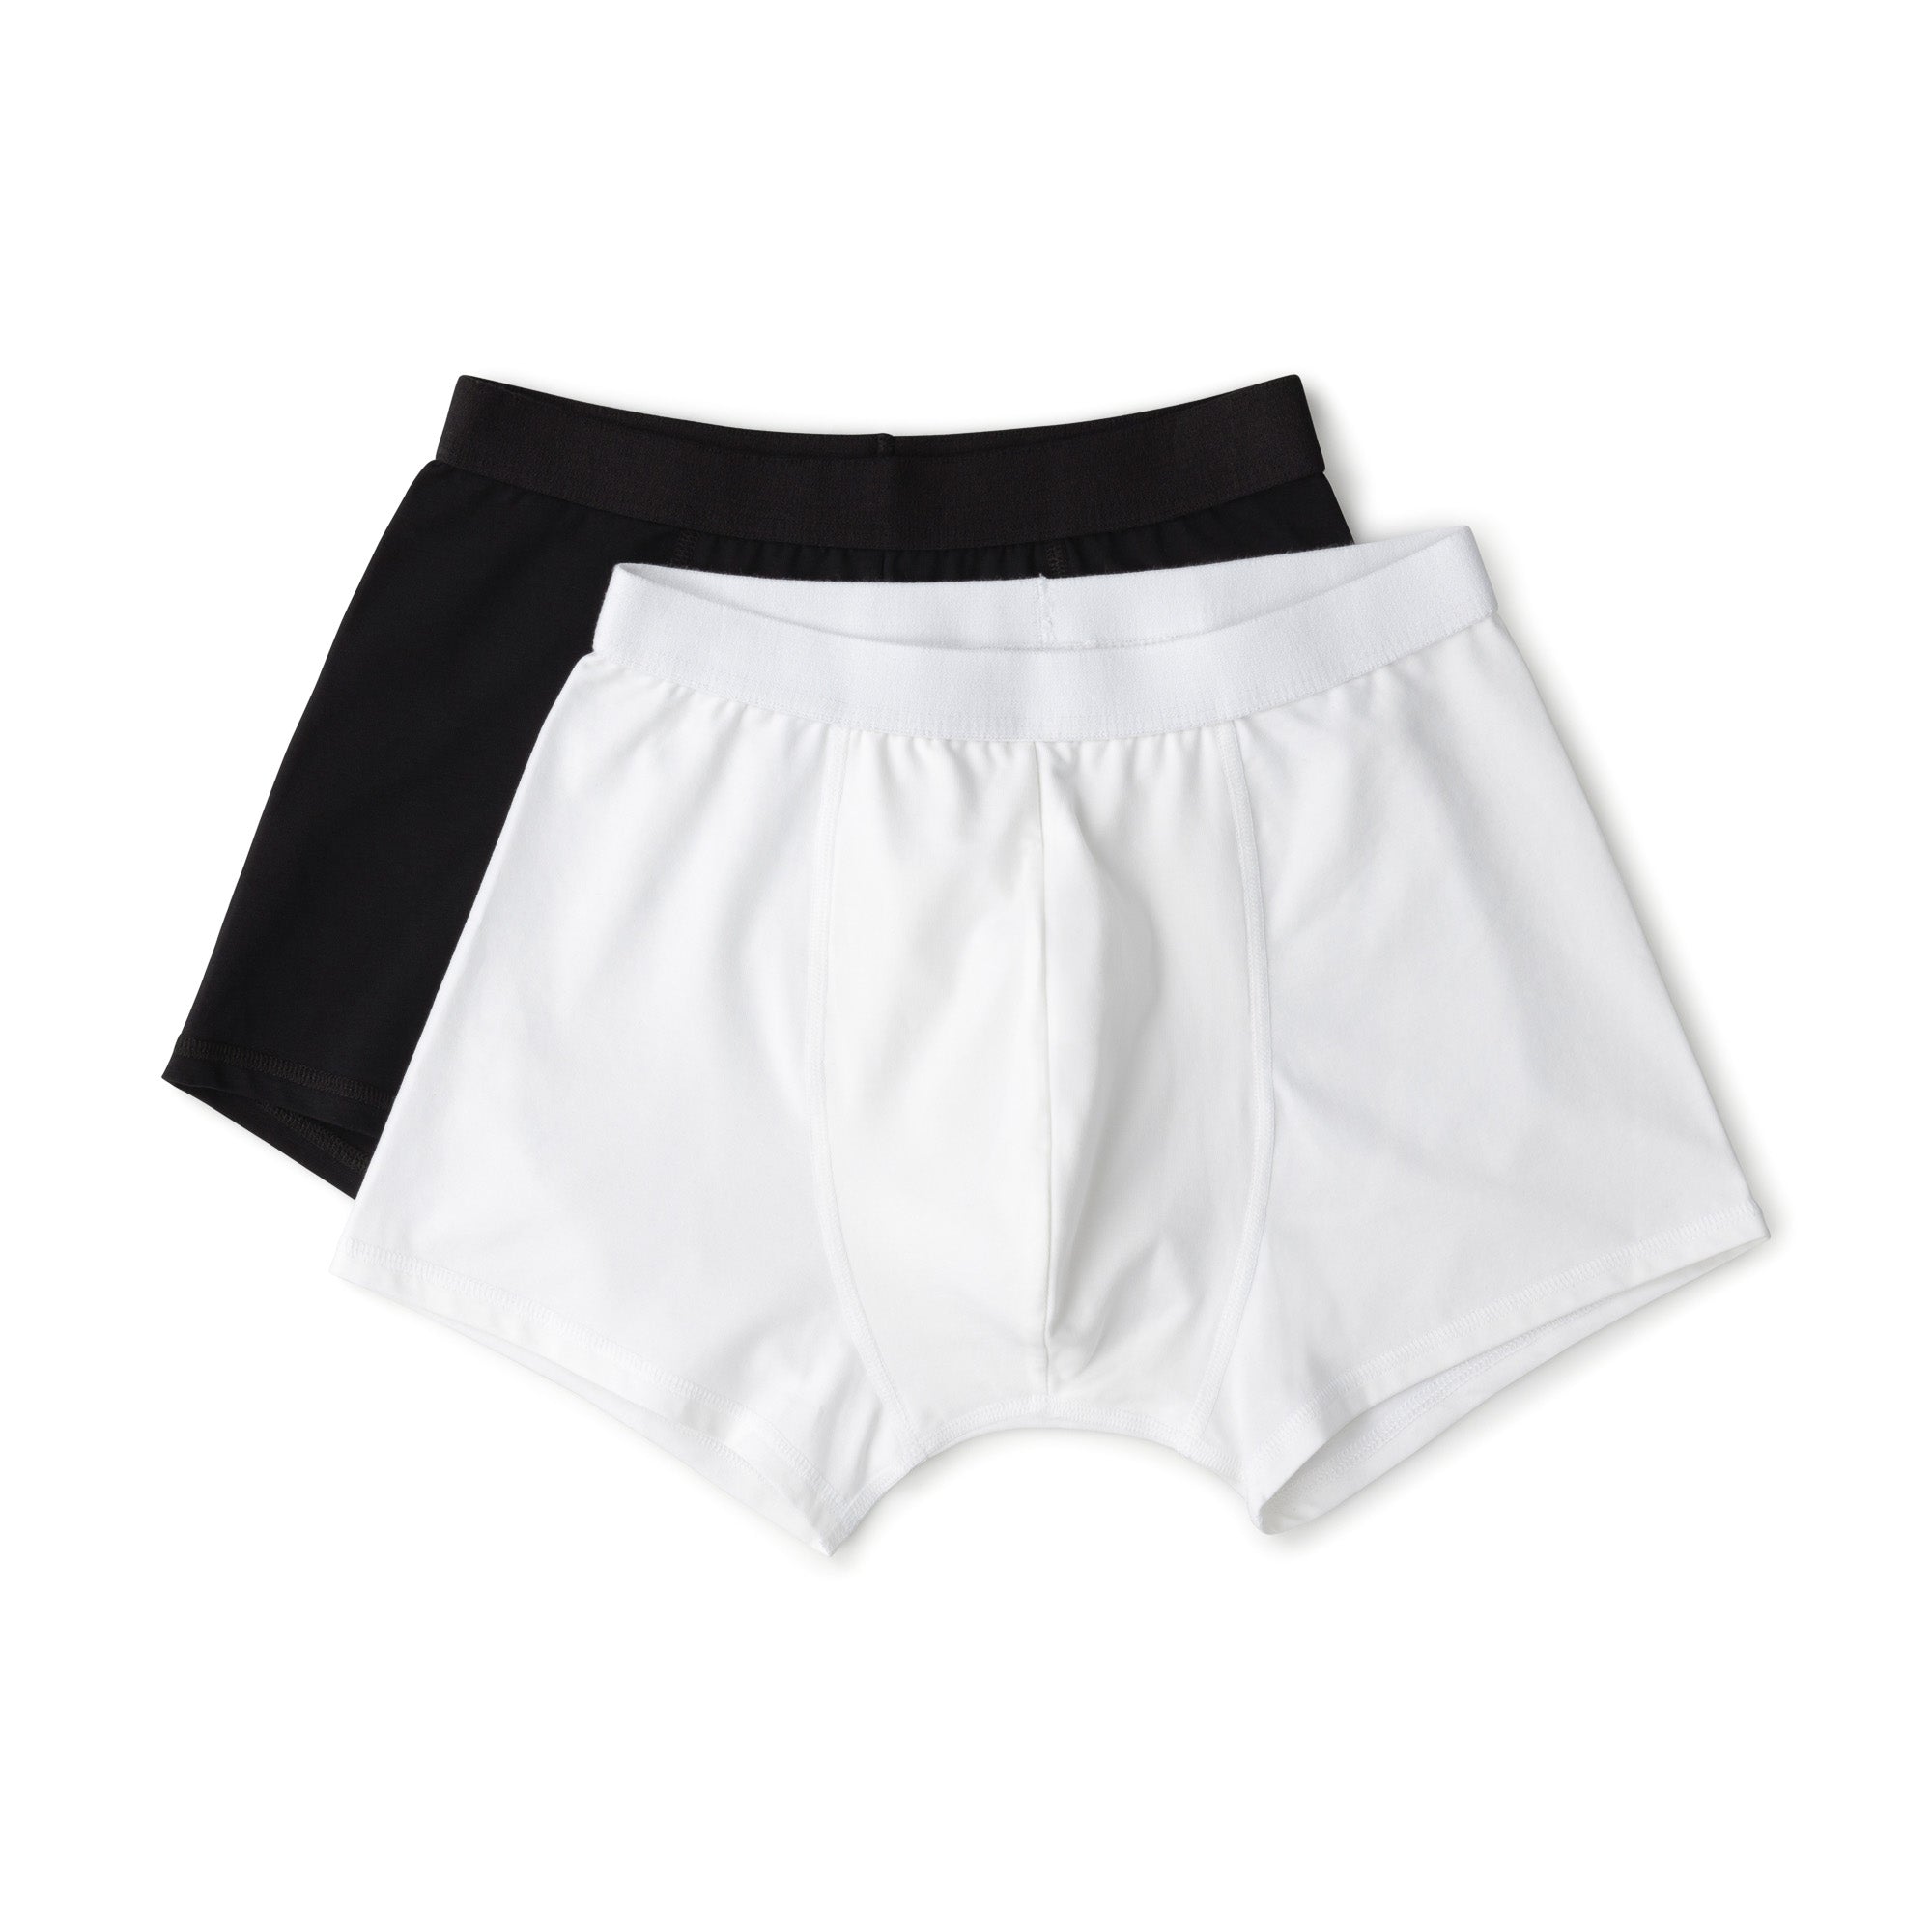 White Pack of two Essentials cotton-blend boxer briefs